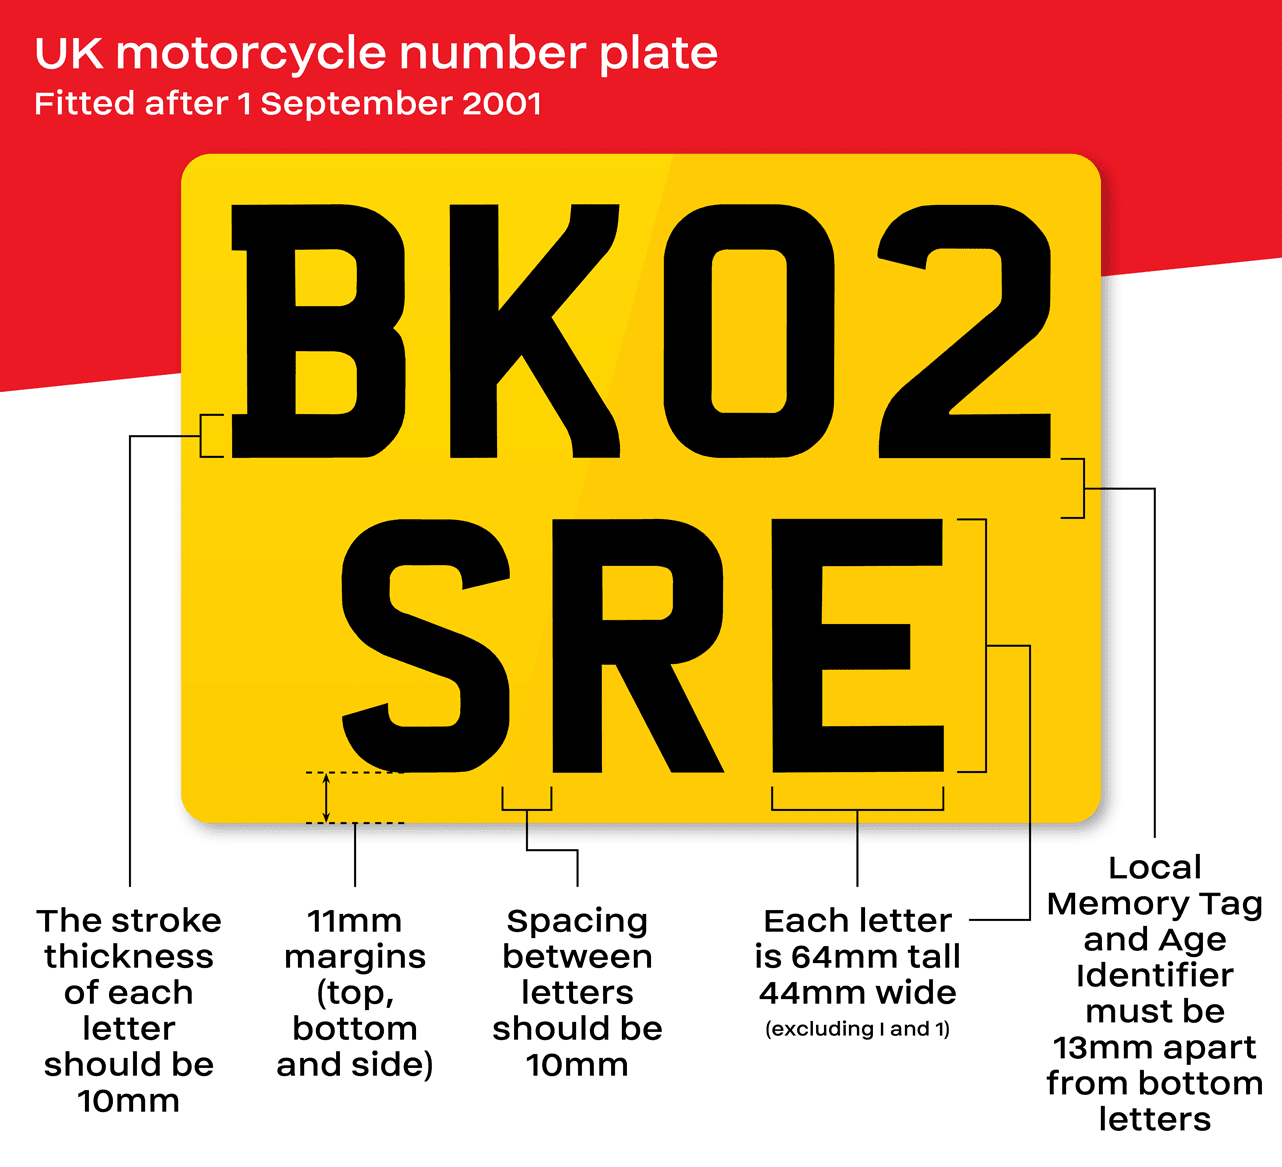 motorcycle-number-plate-size-what-s-the-law-in-the-uk-bikesure